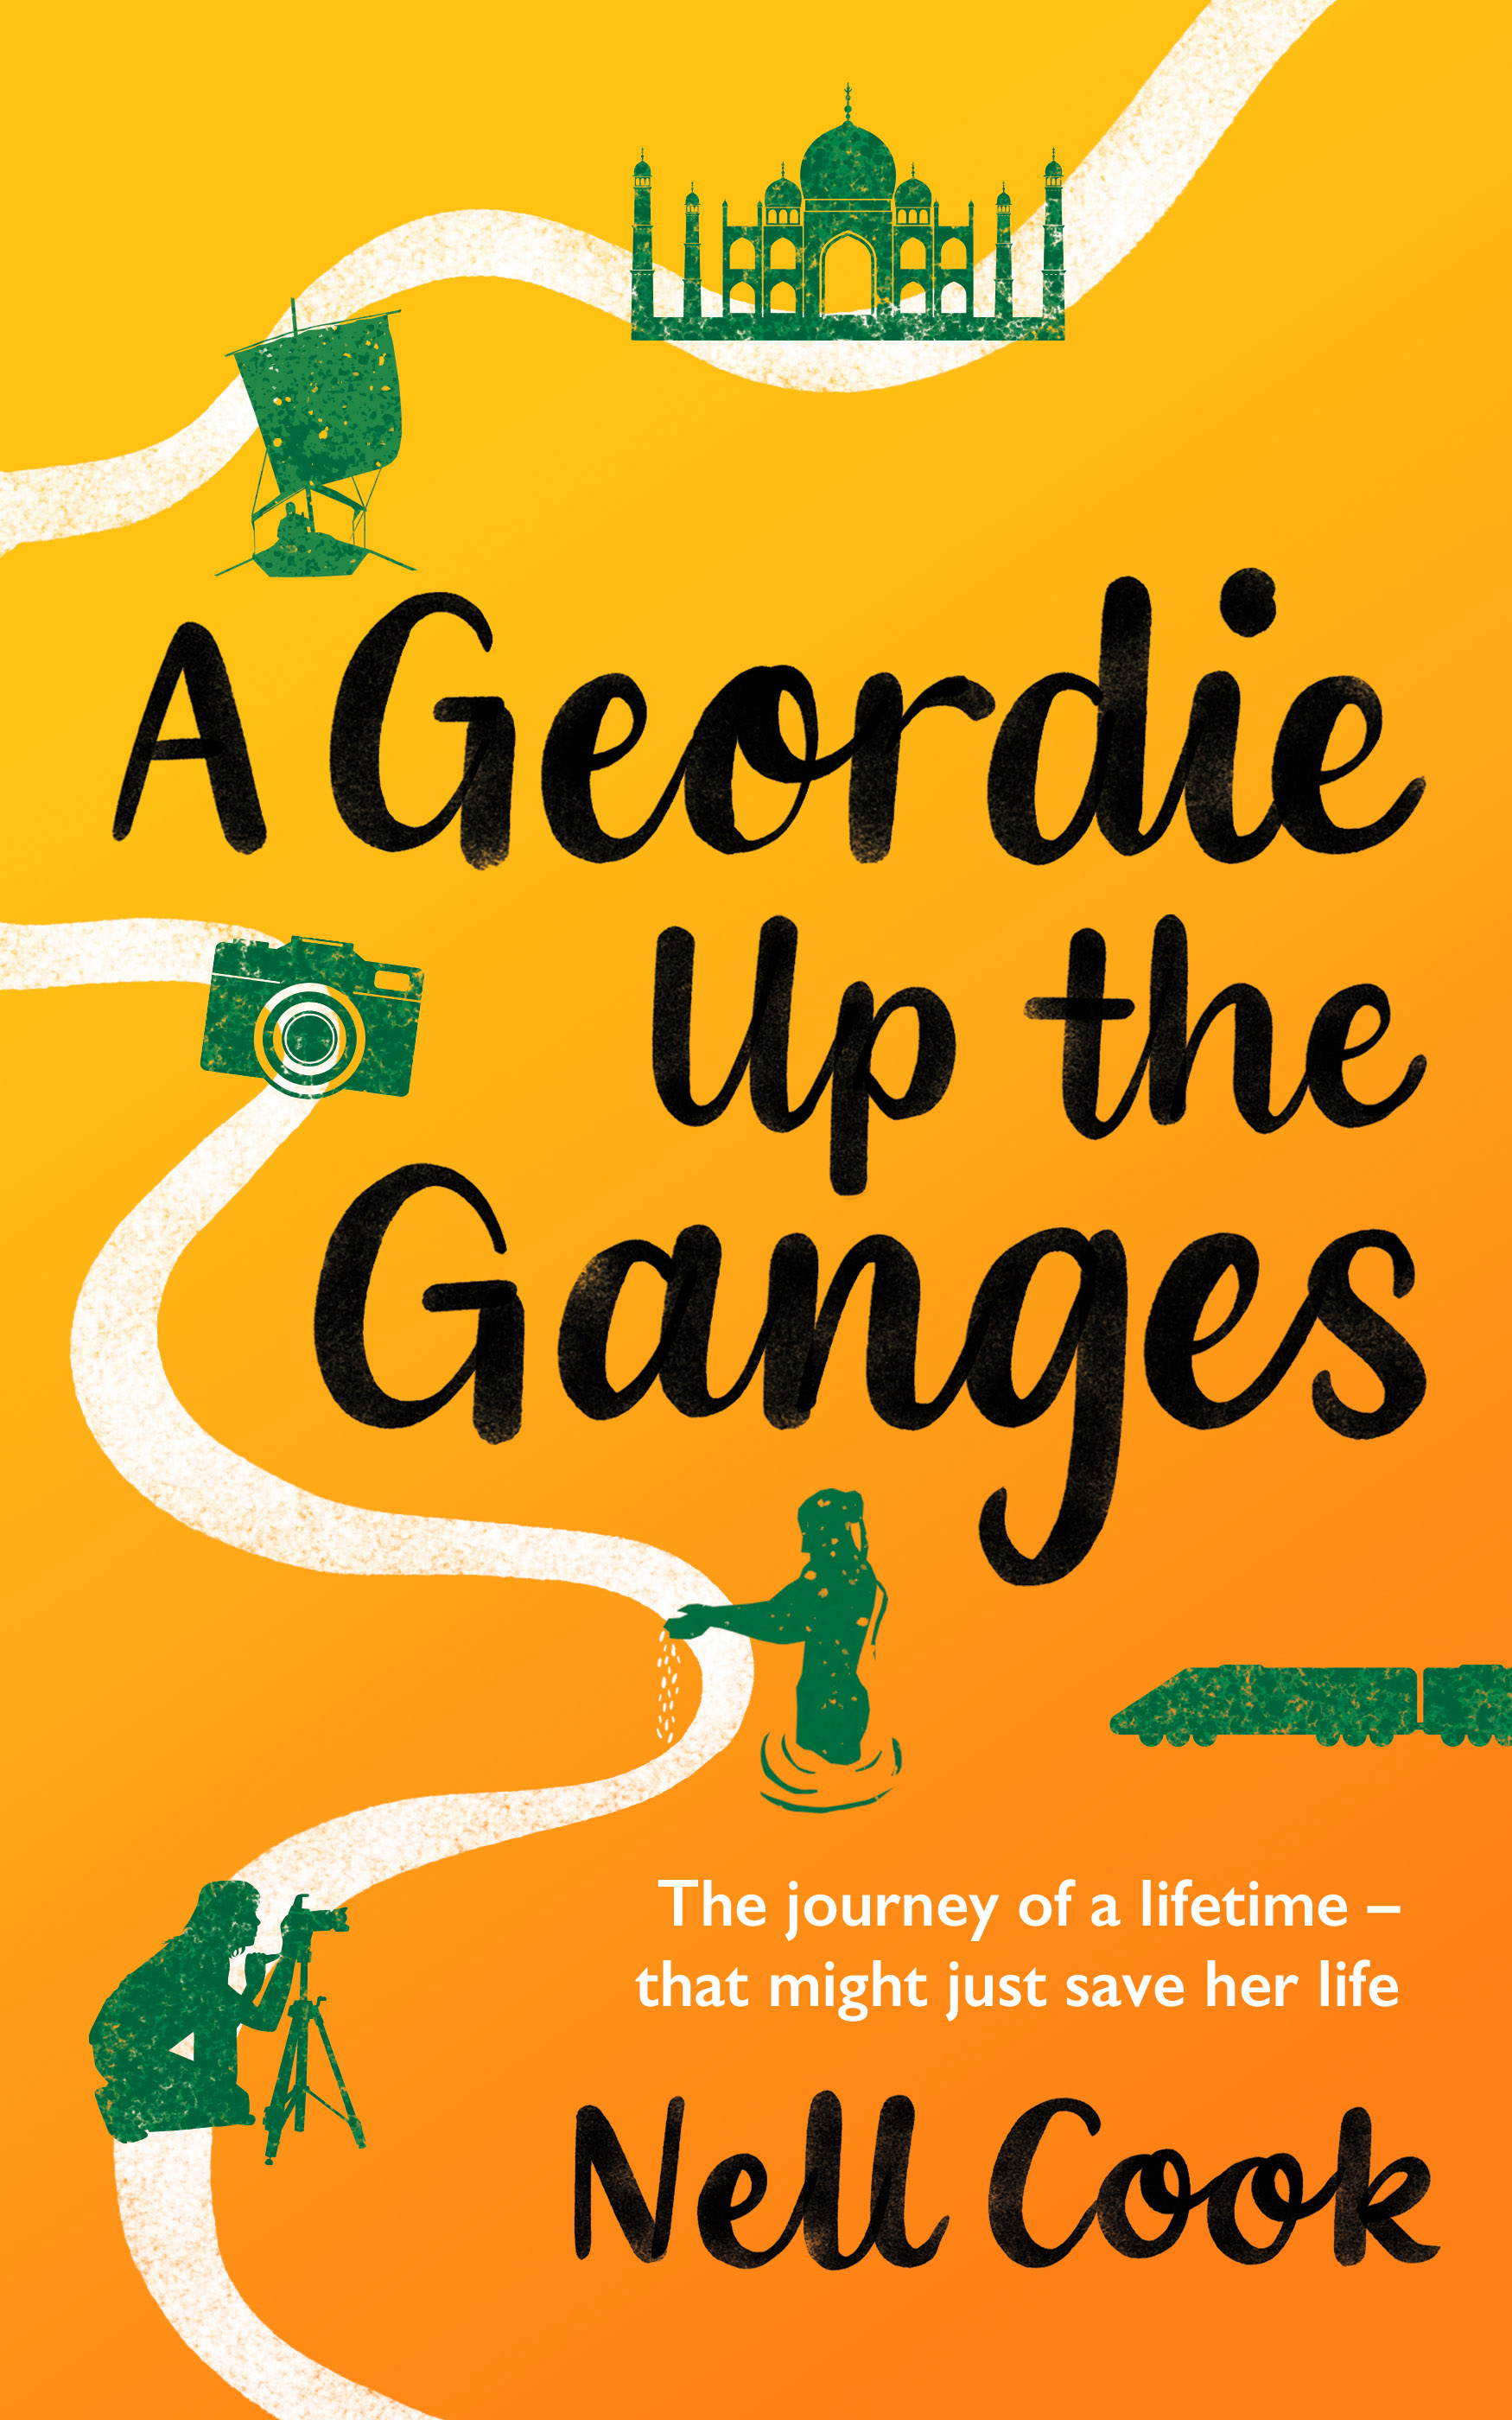 FREE: A Geordie Up the Ganges by Nell Cook